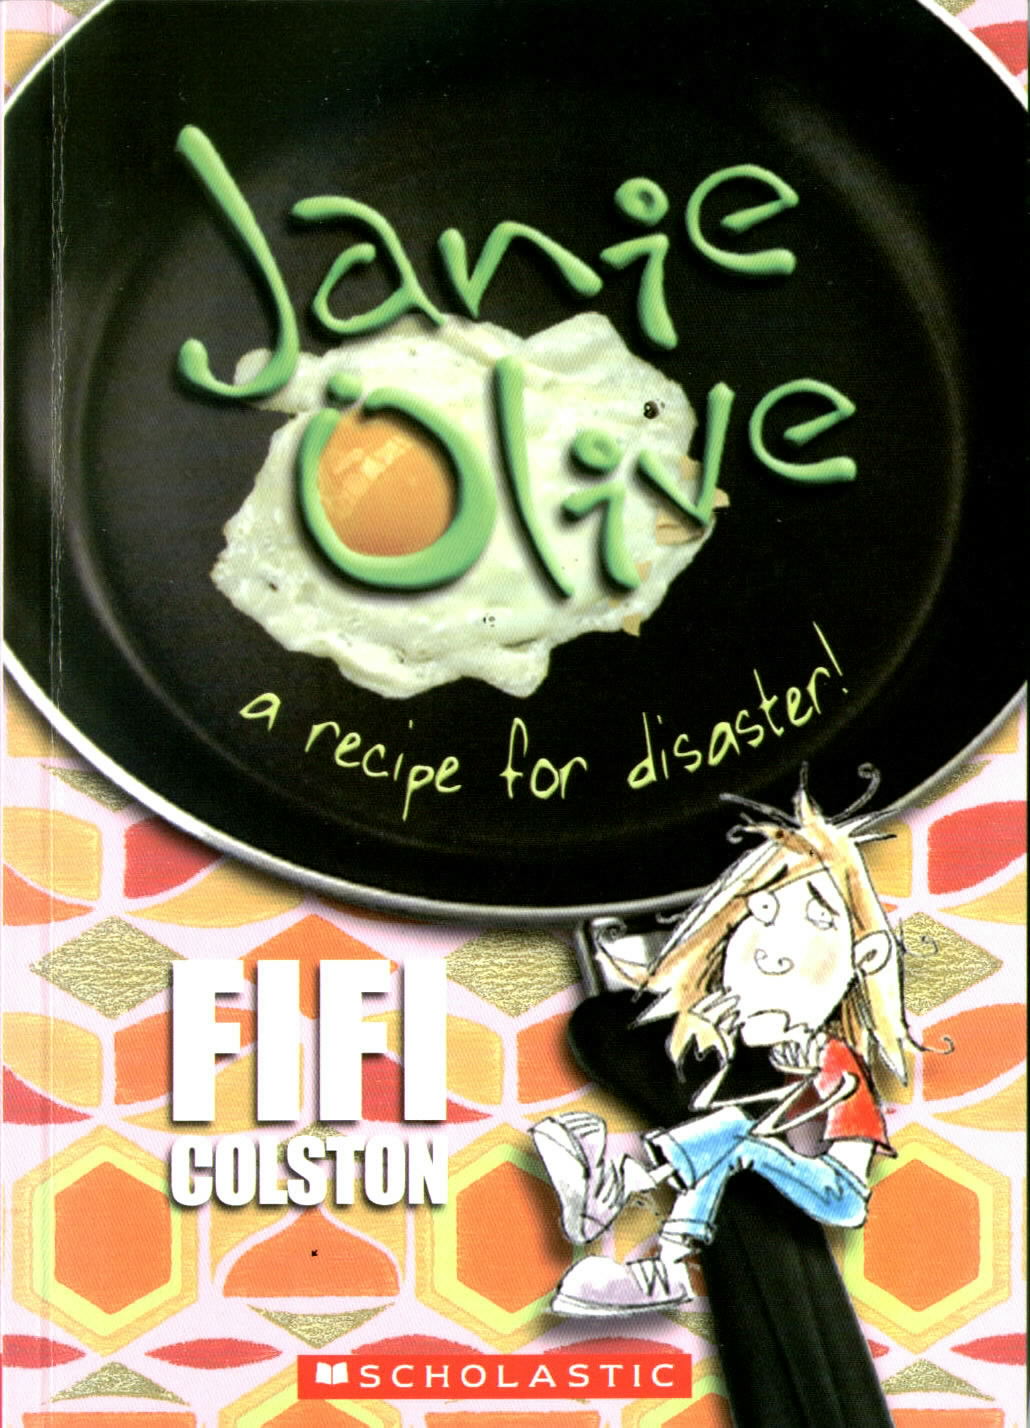 Janie Olive: Image of the cover of the book “Janie Olive”.